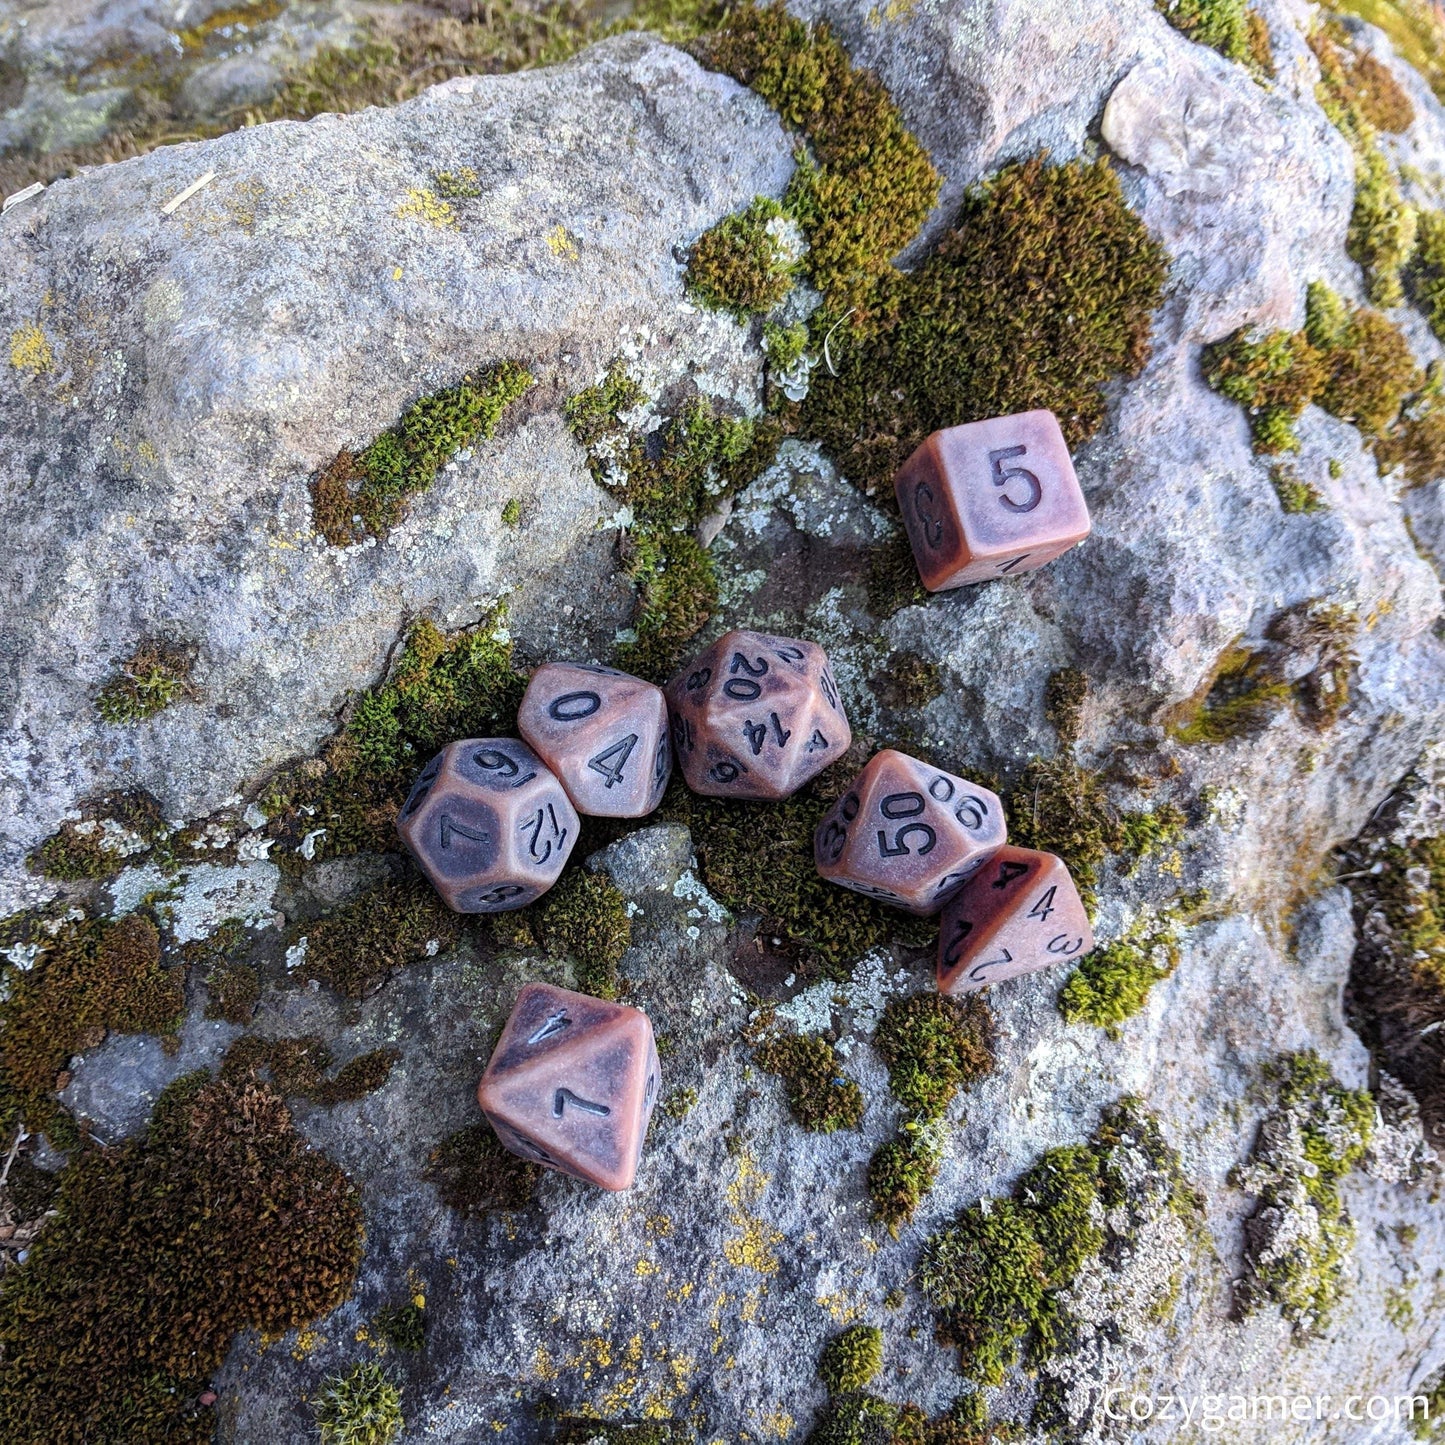 Aged Leather DnD Dice Set, Matte Brown Ancient Dice - CozyGamer